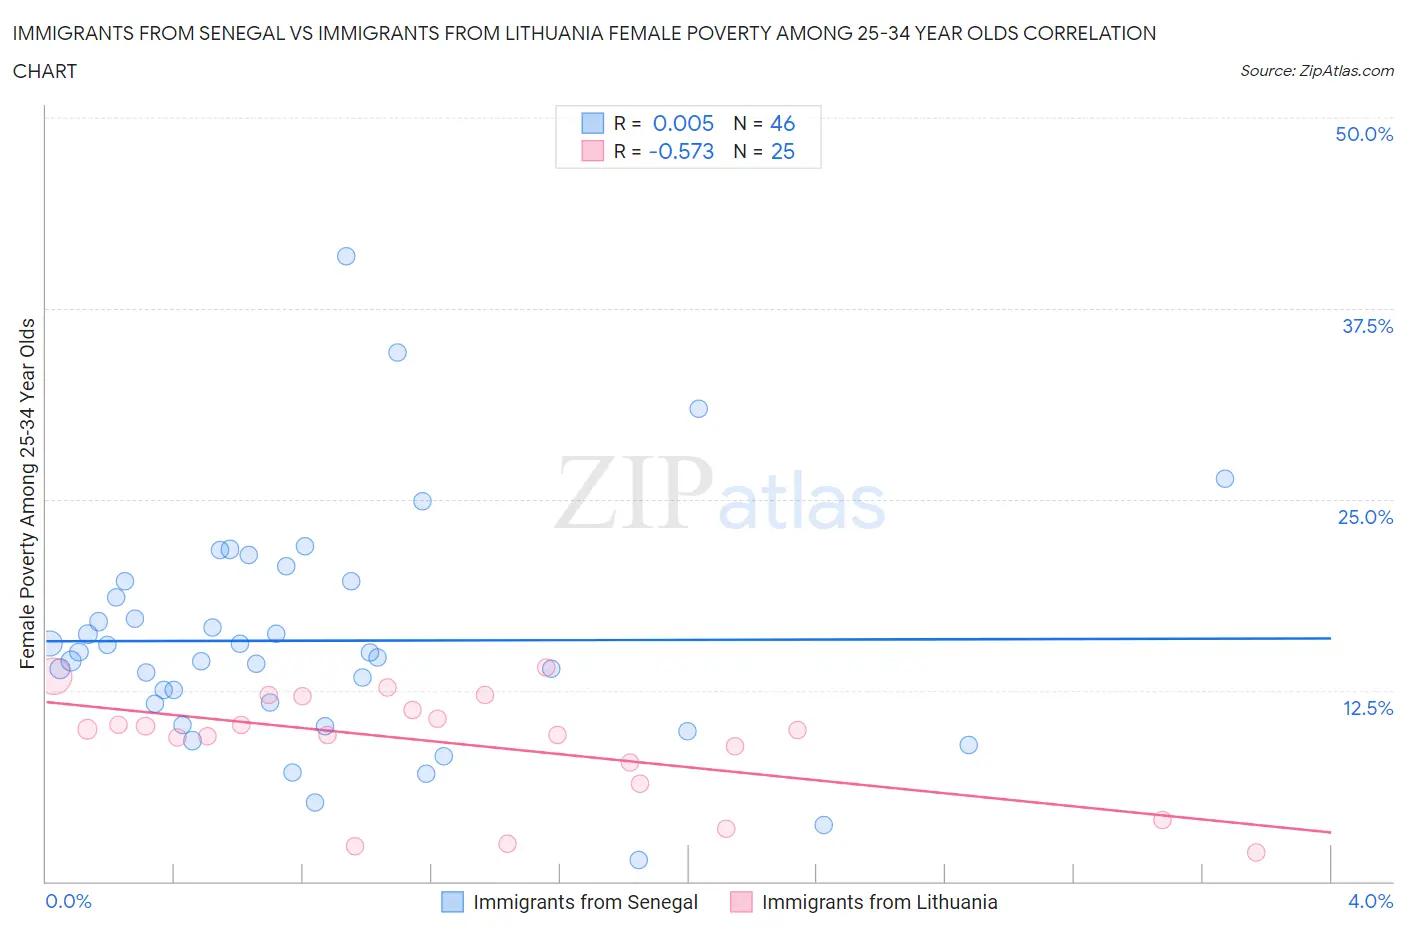 Immigrants from Senegal vs Immigrants from Lithuania Female Poverty Among 25-34 Year Olds